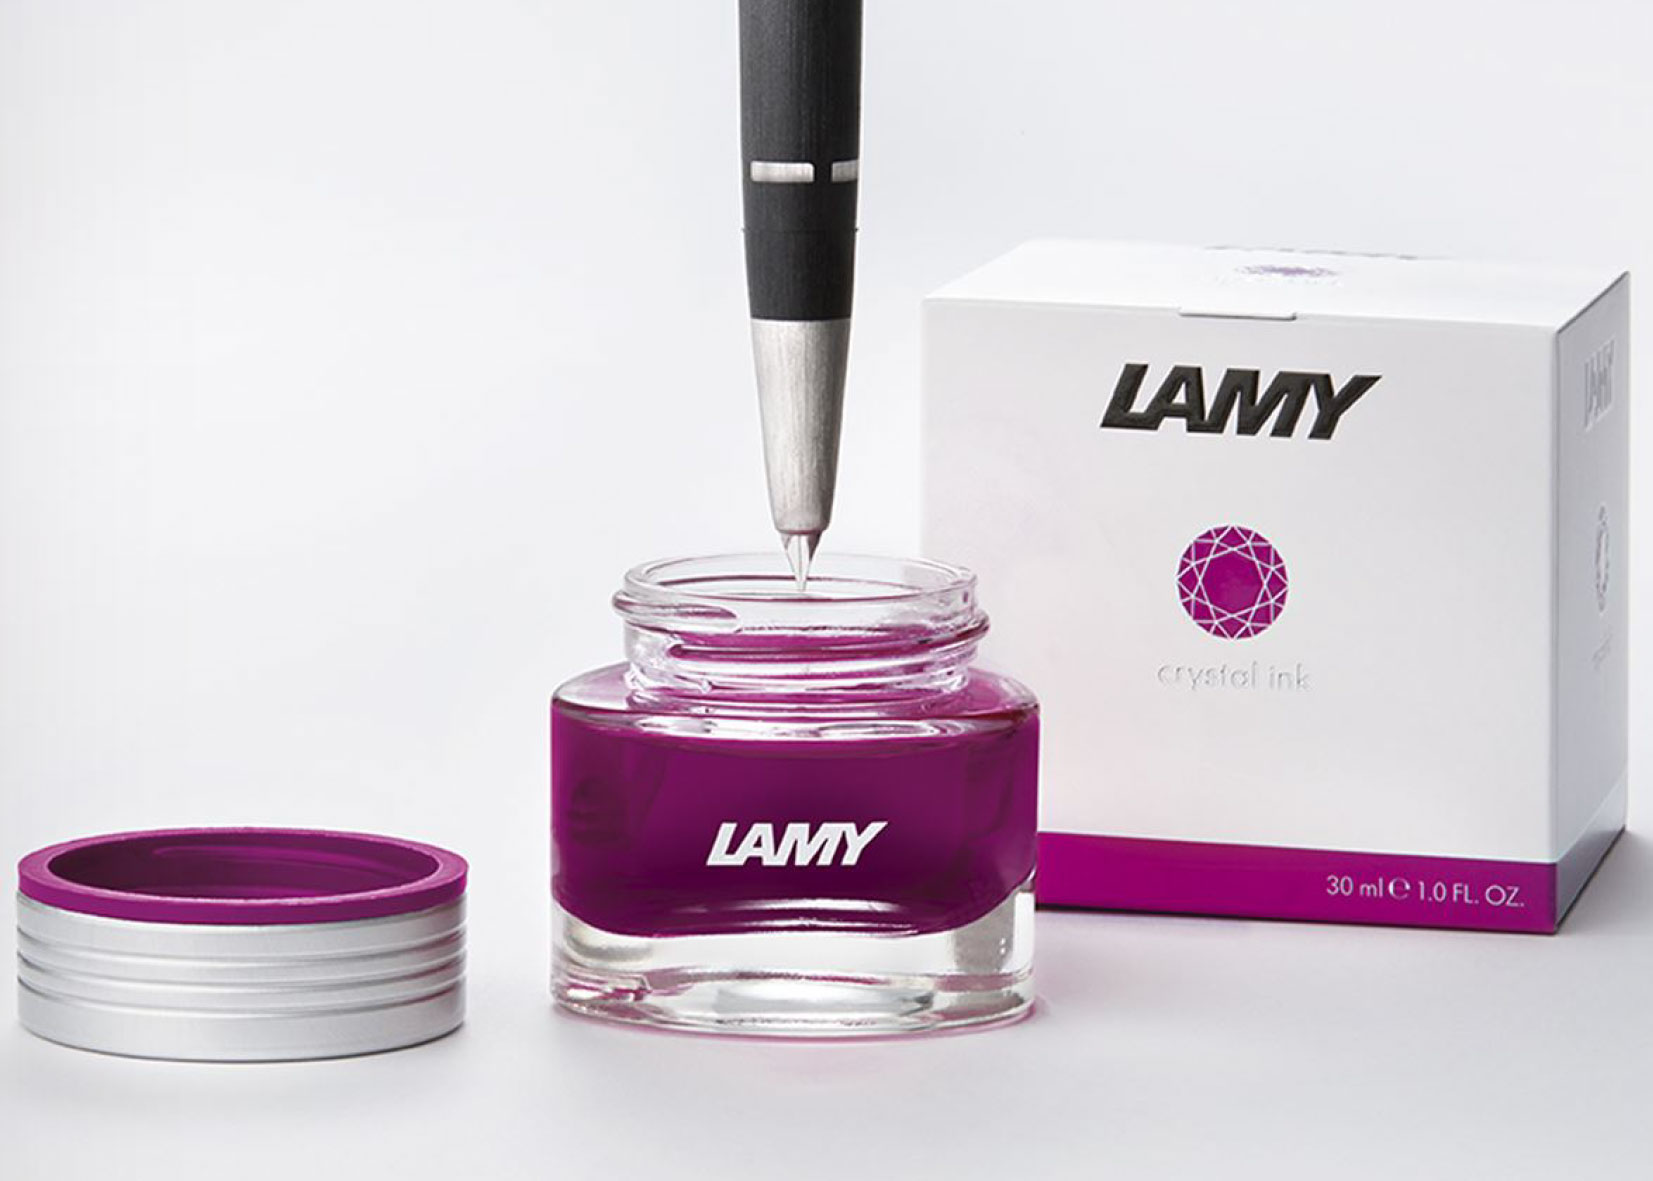 Delving into the world of LAMY